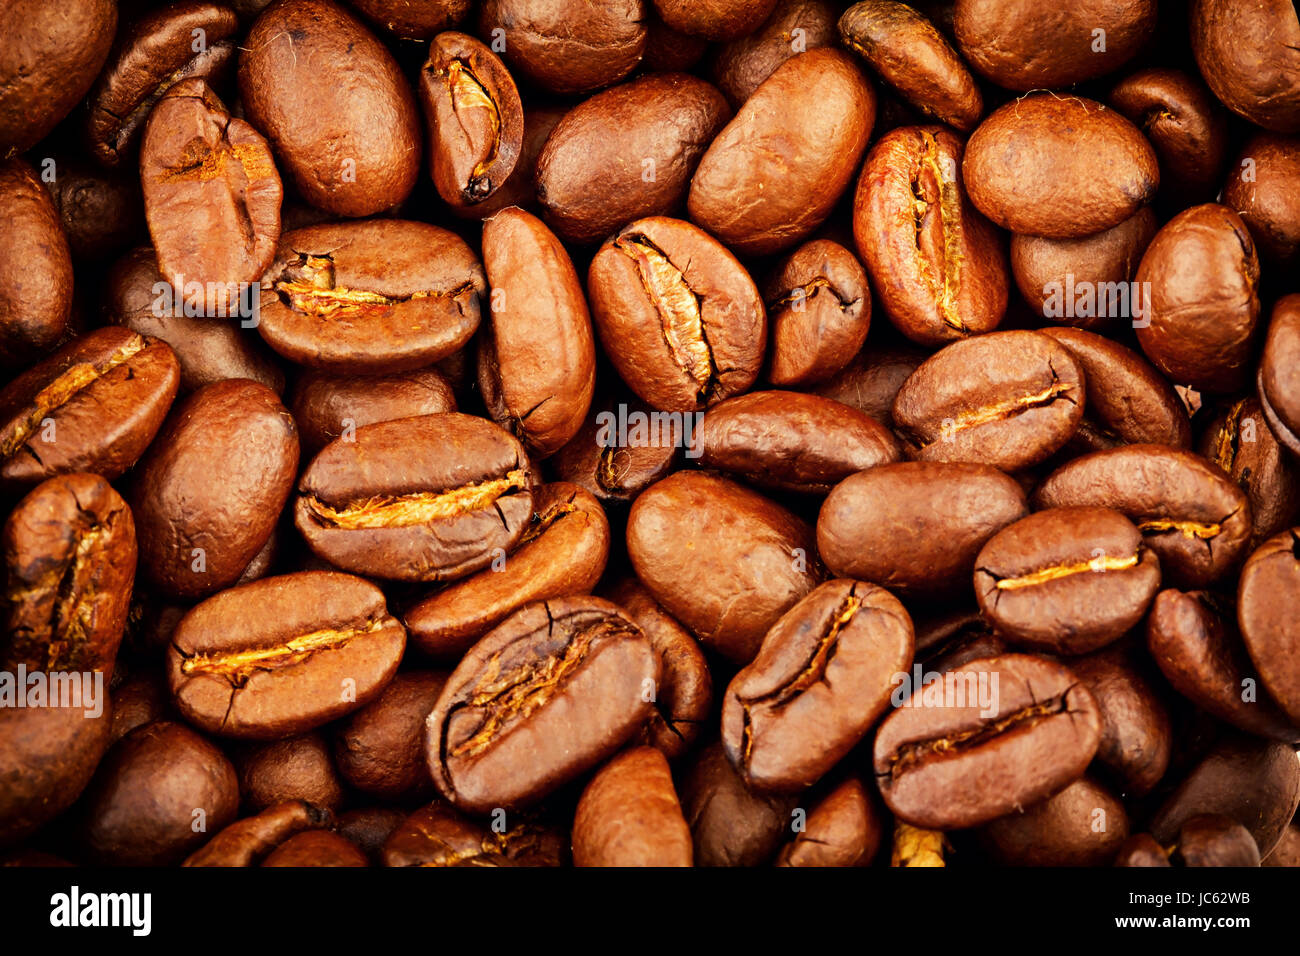 Roasted coffee beans extreme closeup background Stock Photo